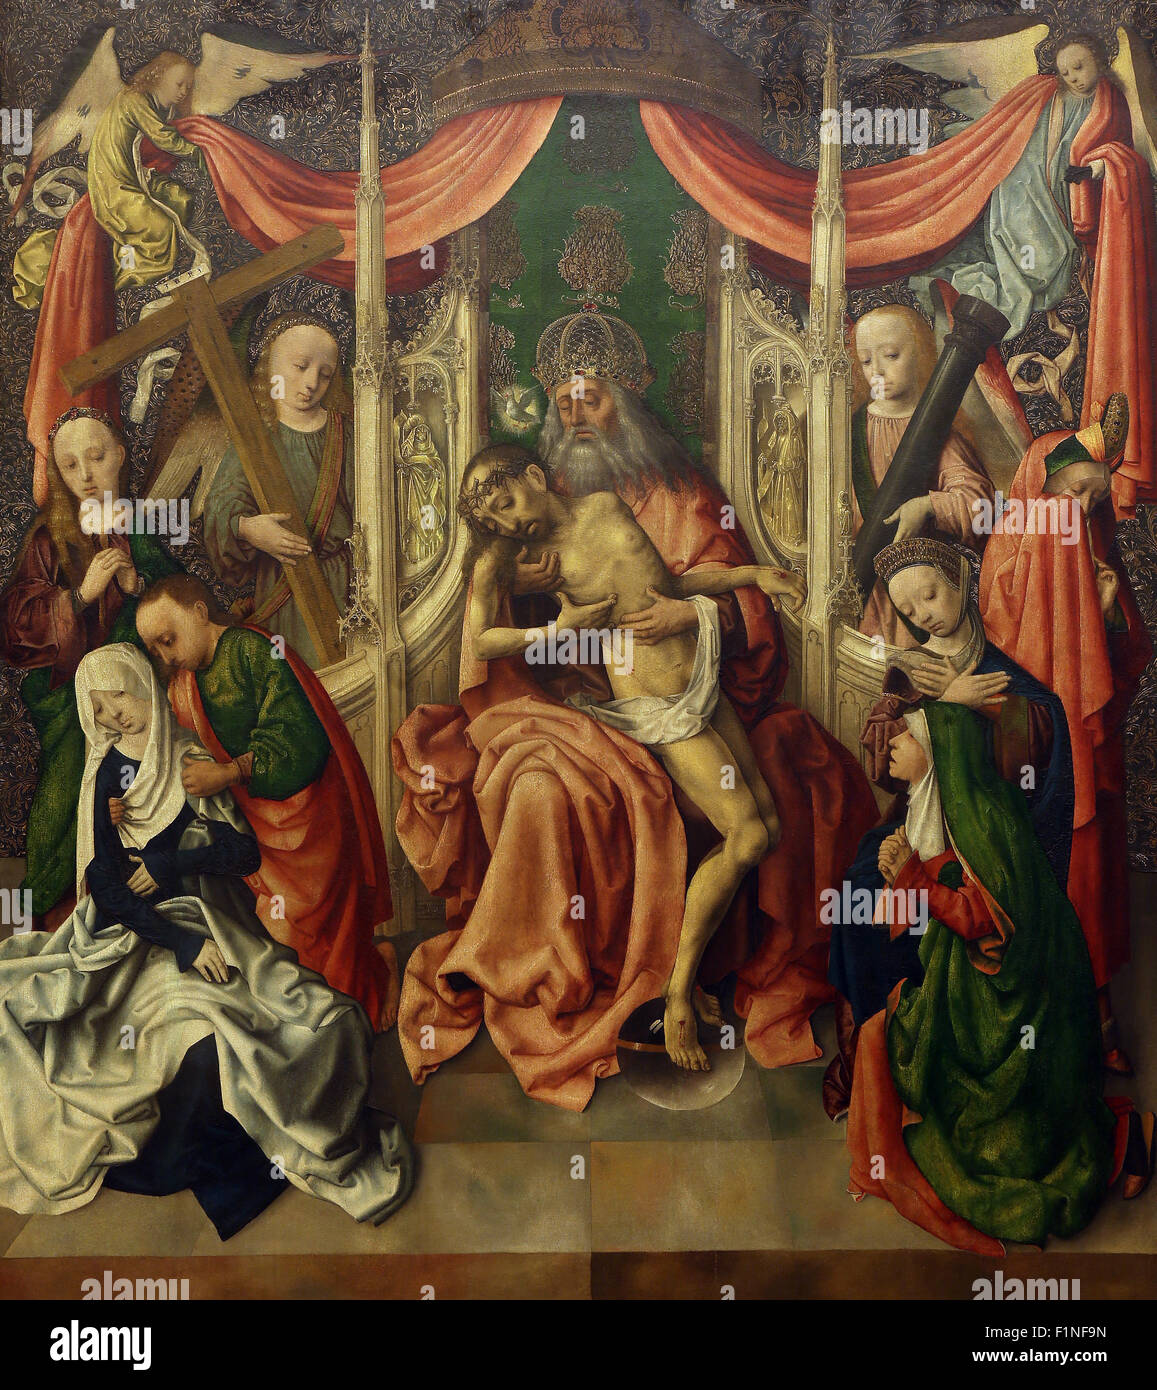 Master of the painting Virgo inter virgines: Throne of Mercy, Old Masters Collection, in Zagreb, Croatia Stock Photo